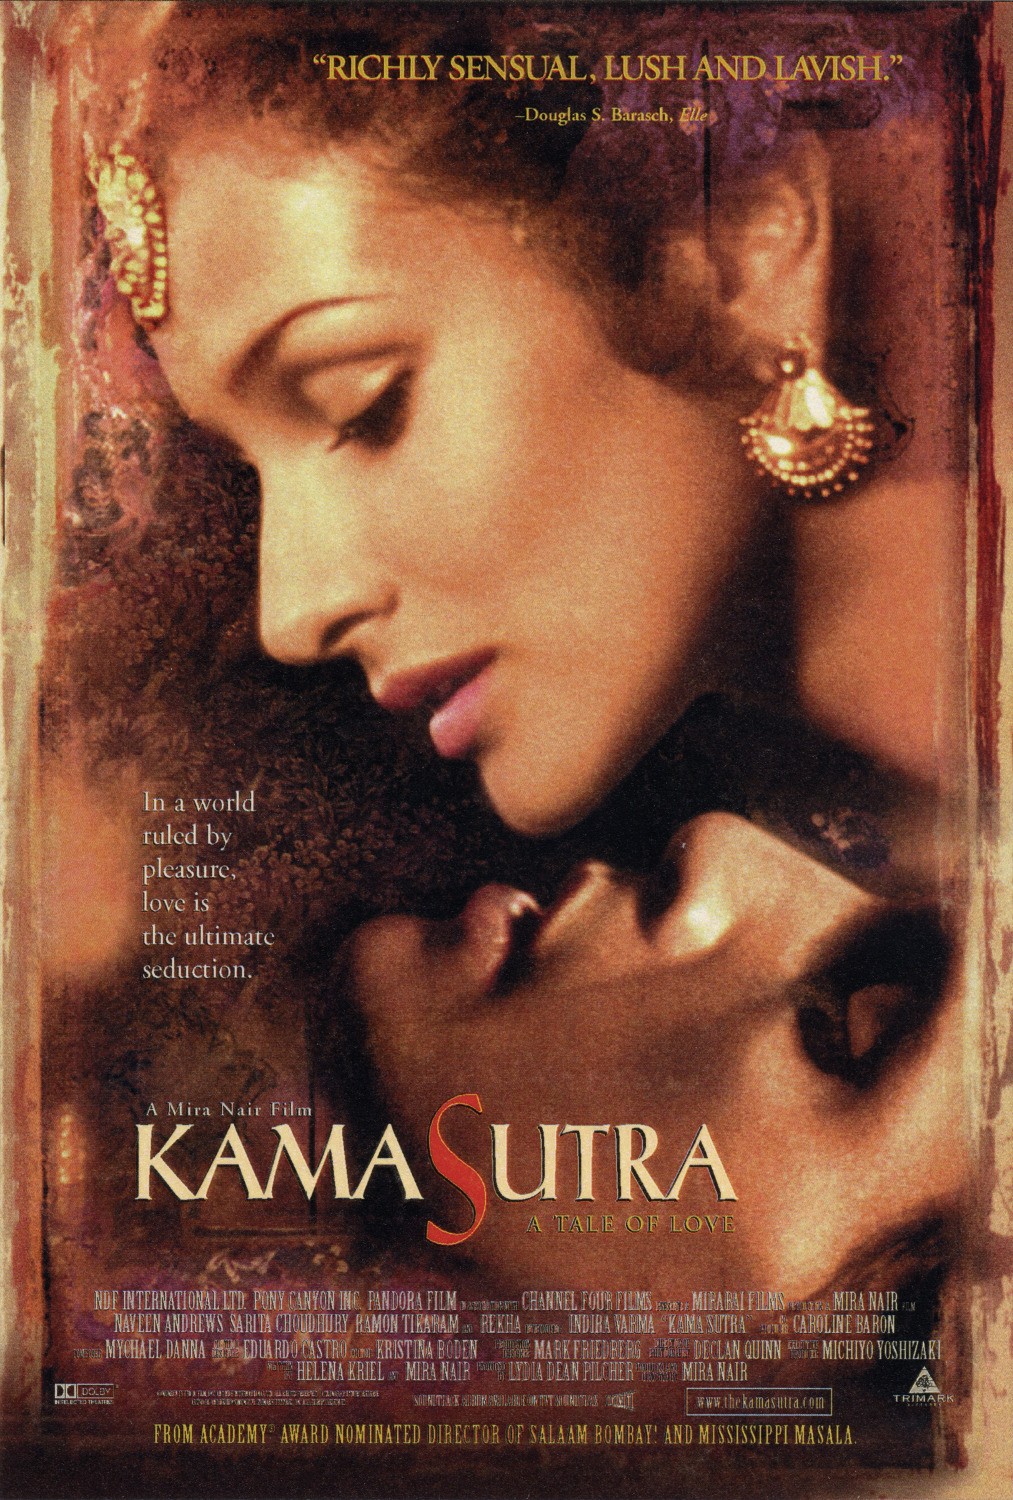 Kama Sutra A Tale Of Love Of Extra Large Movie Poster Image